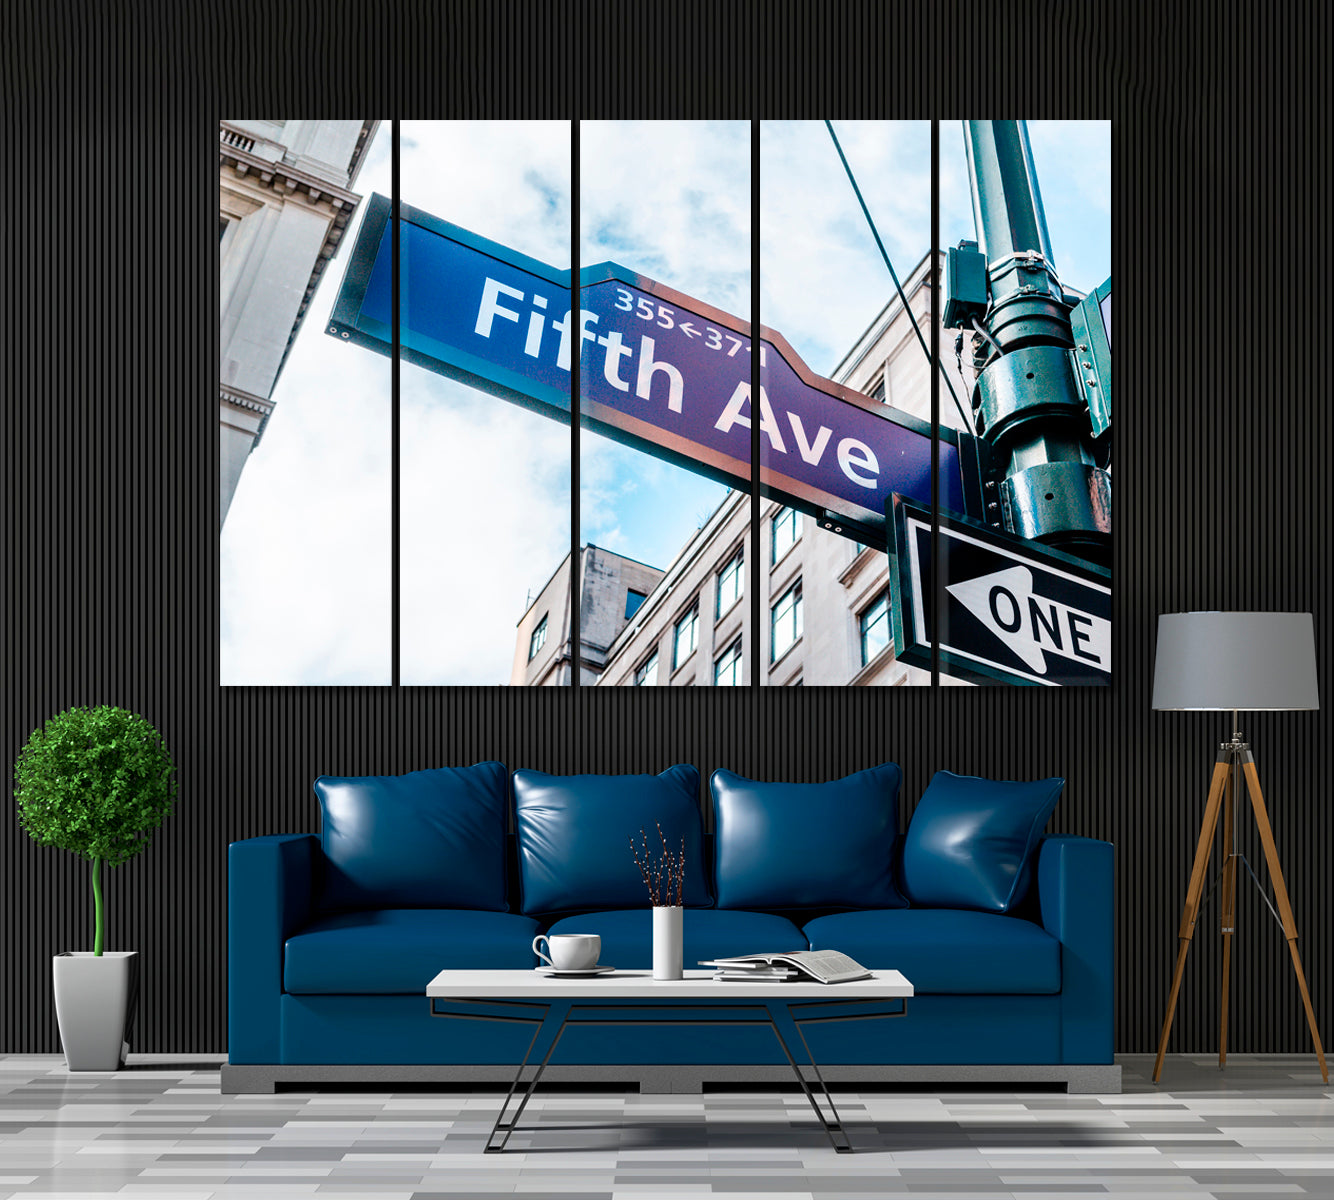 5th Avenue Sign New York Canvas Print ArtLexy 5 Panels 36"x24" inches 